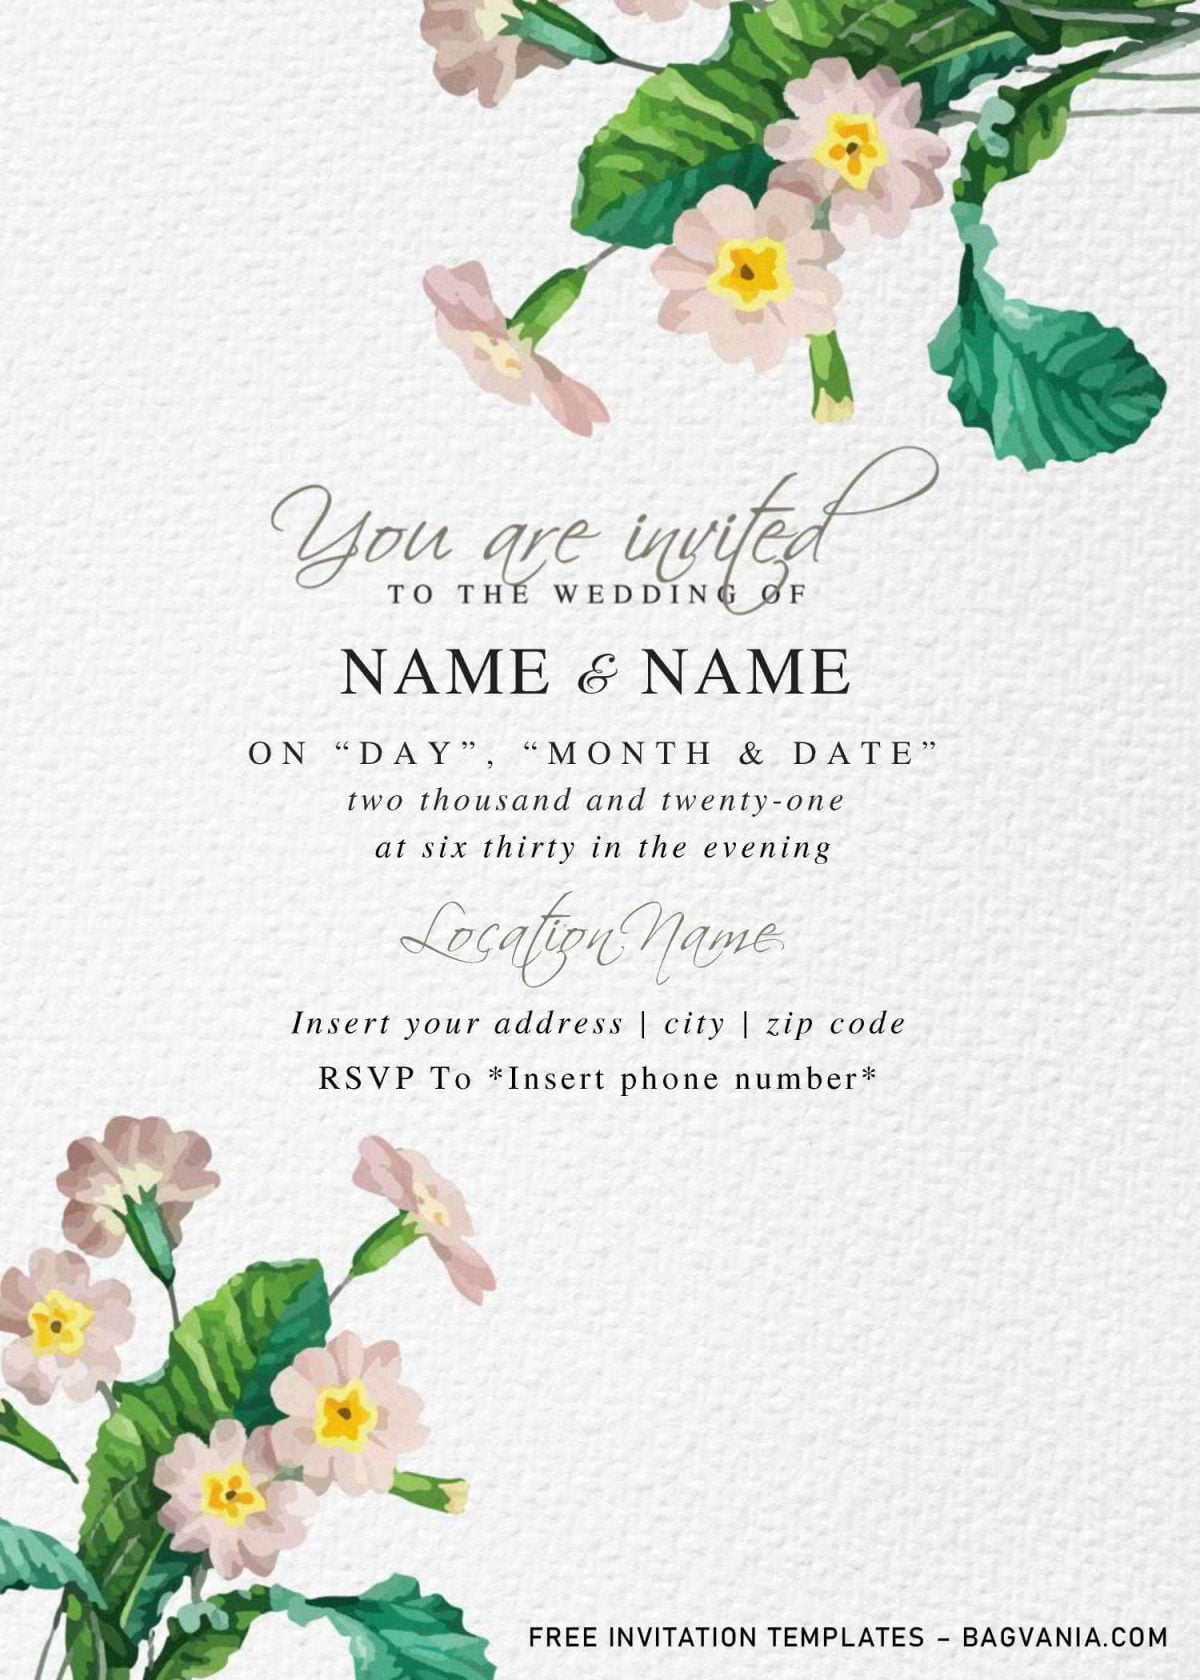 Free Botanical Floral Wedding Invitation Templates For Word and has blush pink roses